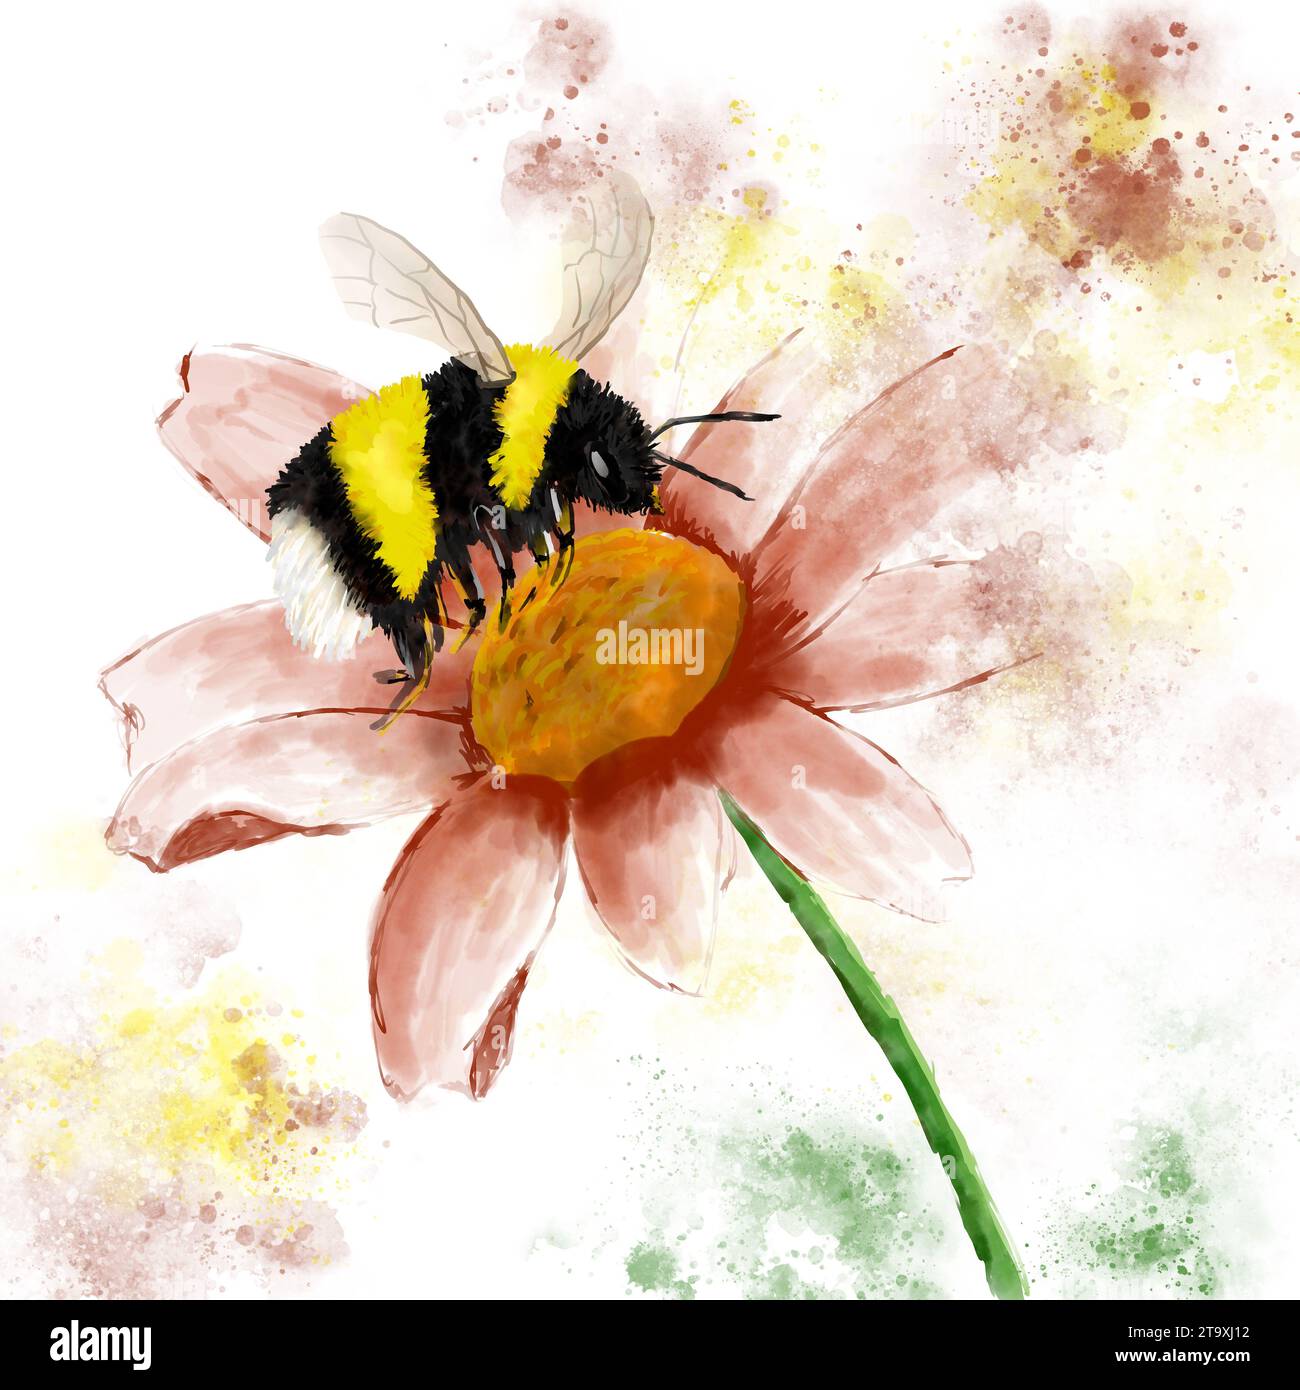 Cute bumblebee pollinating a flower Stock Photo